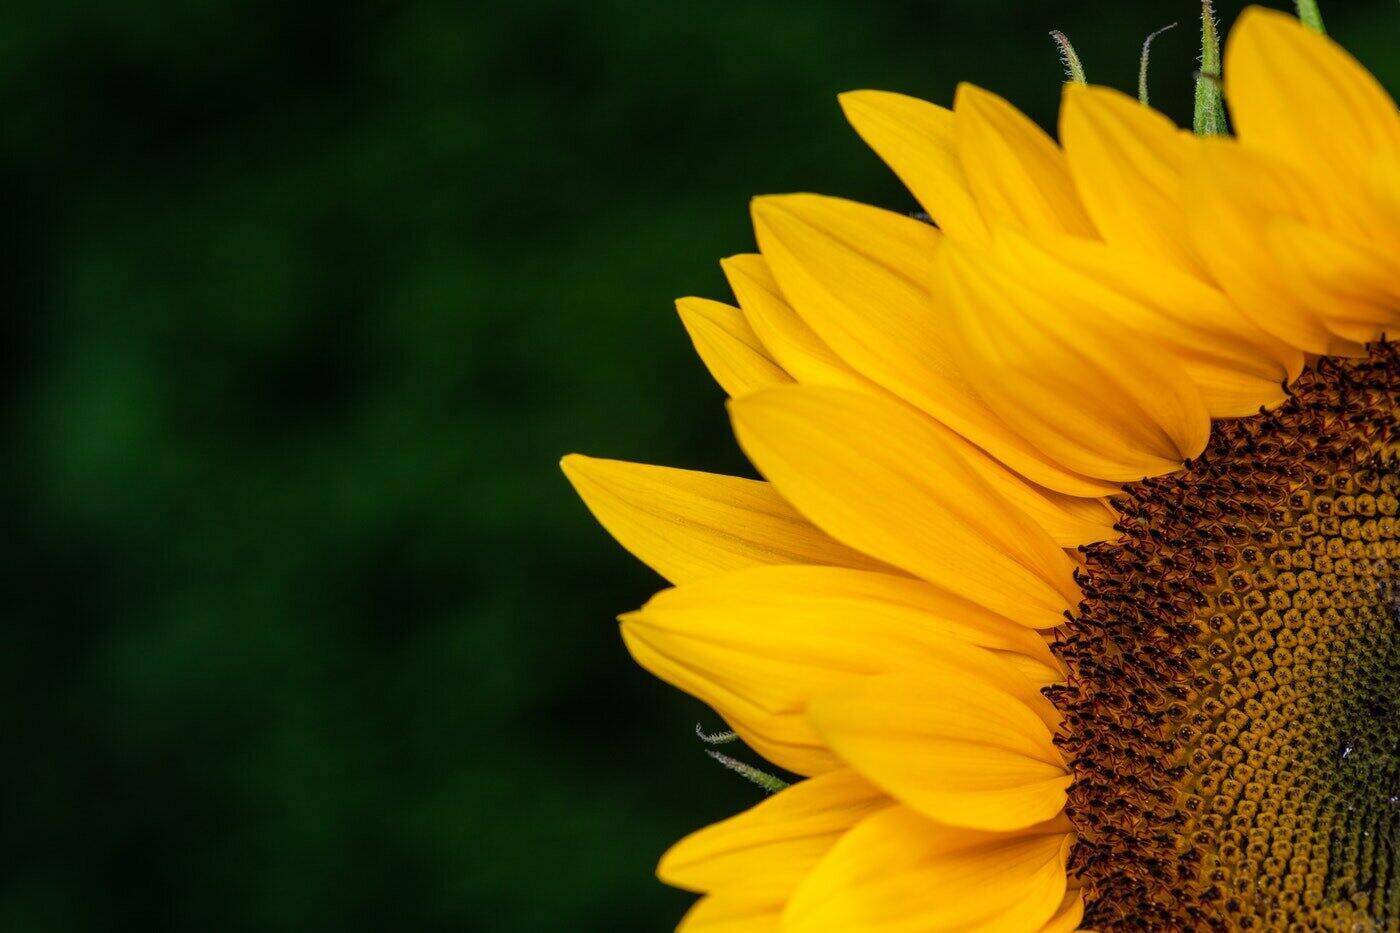 sunflower in corner of picture - sunflowers meaning and symbolism